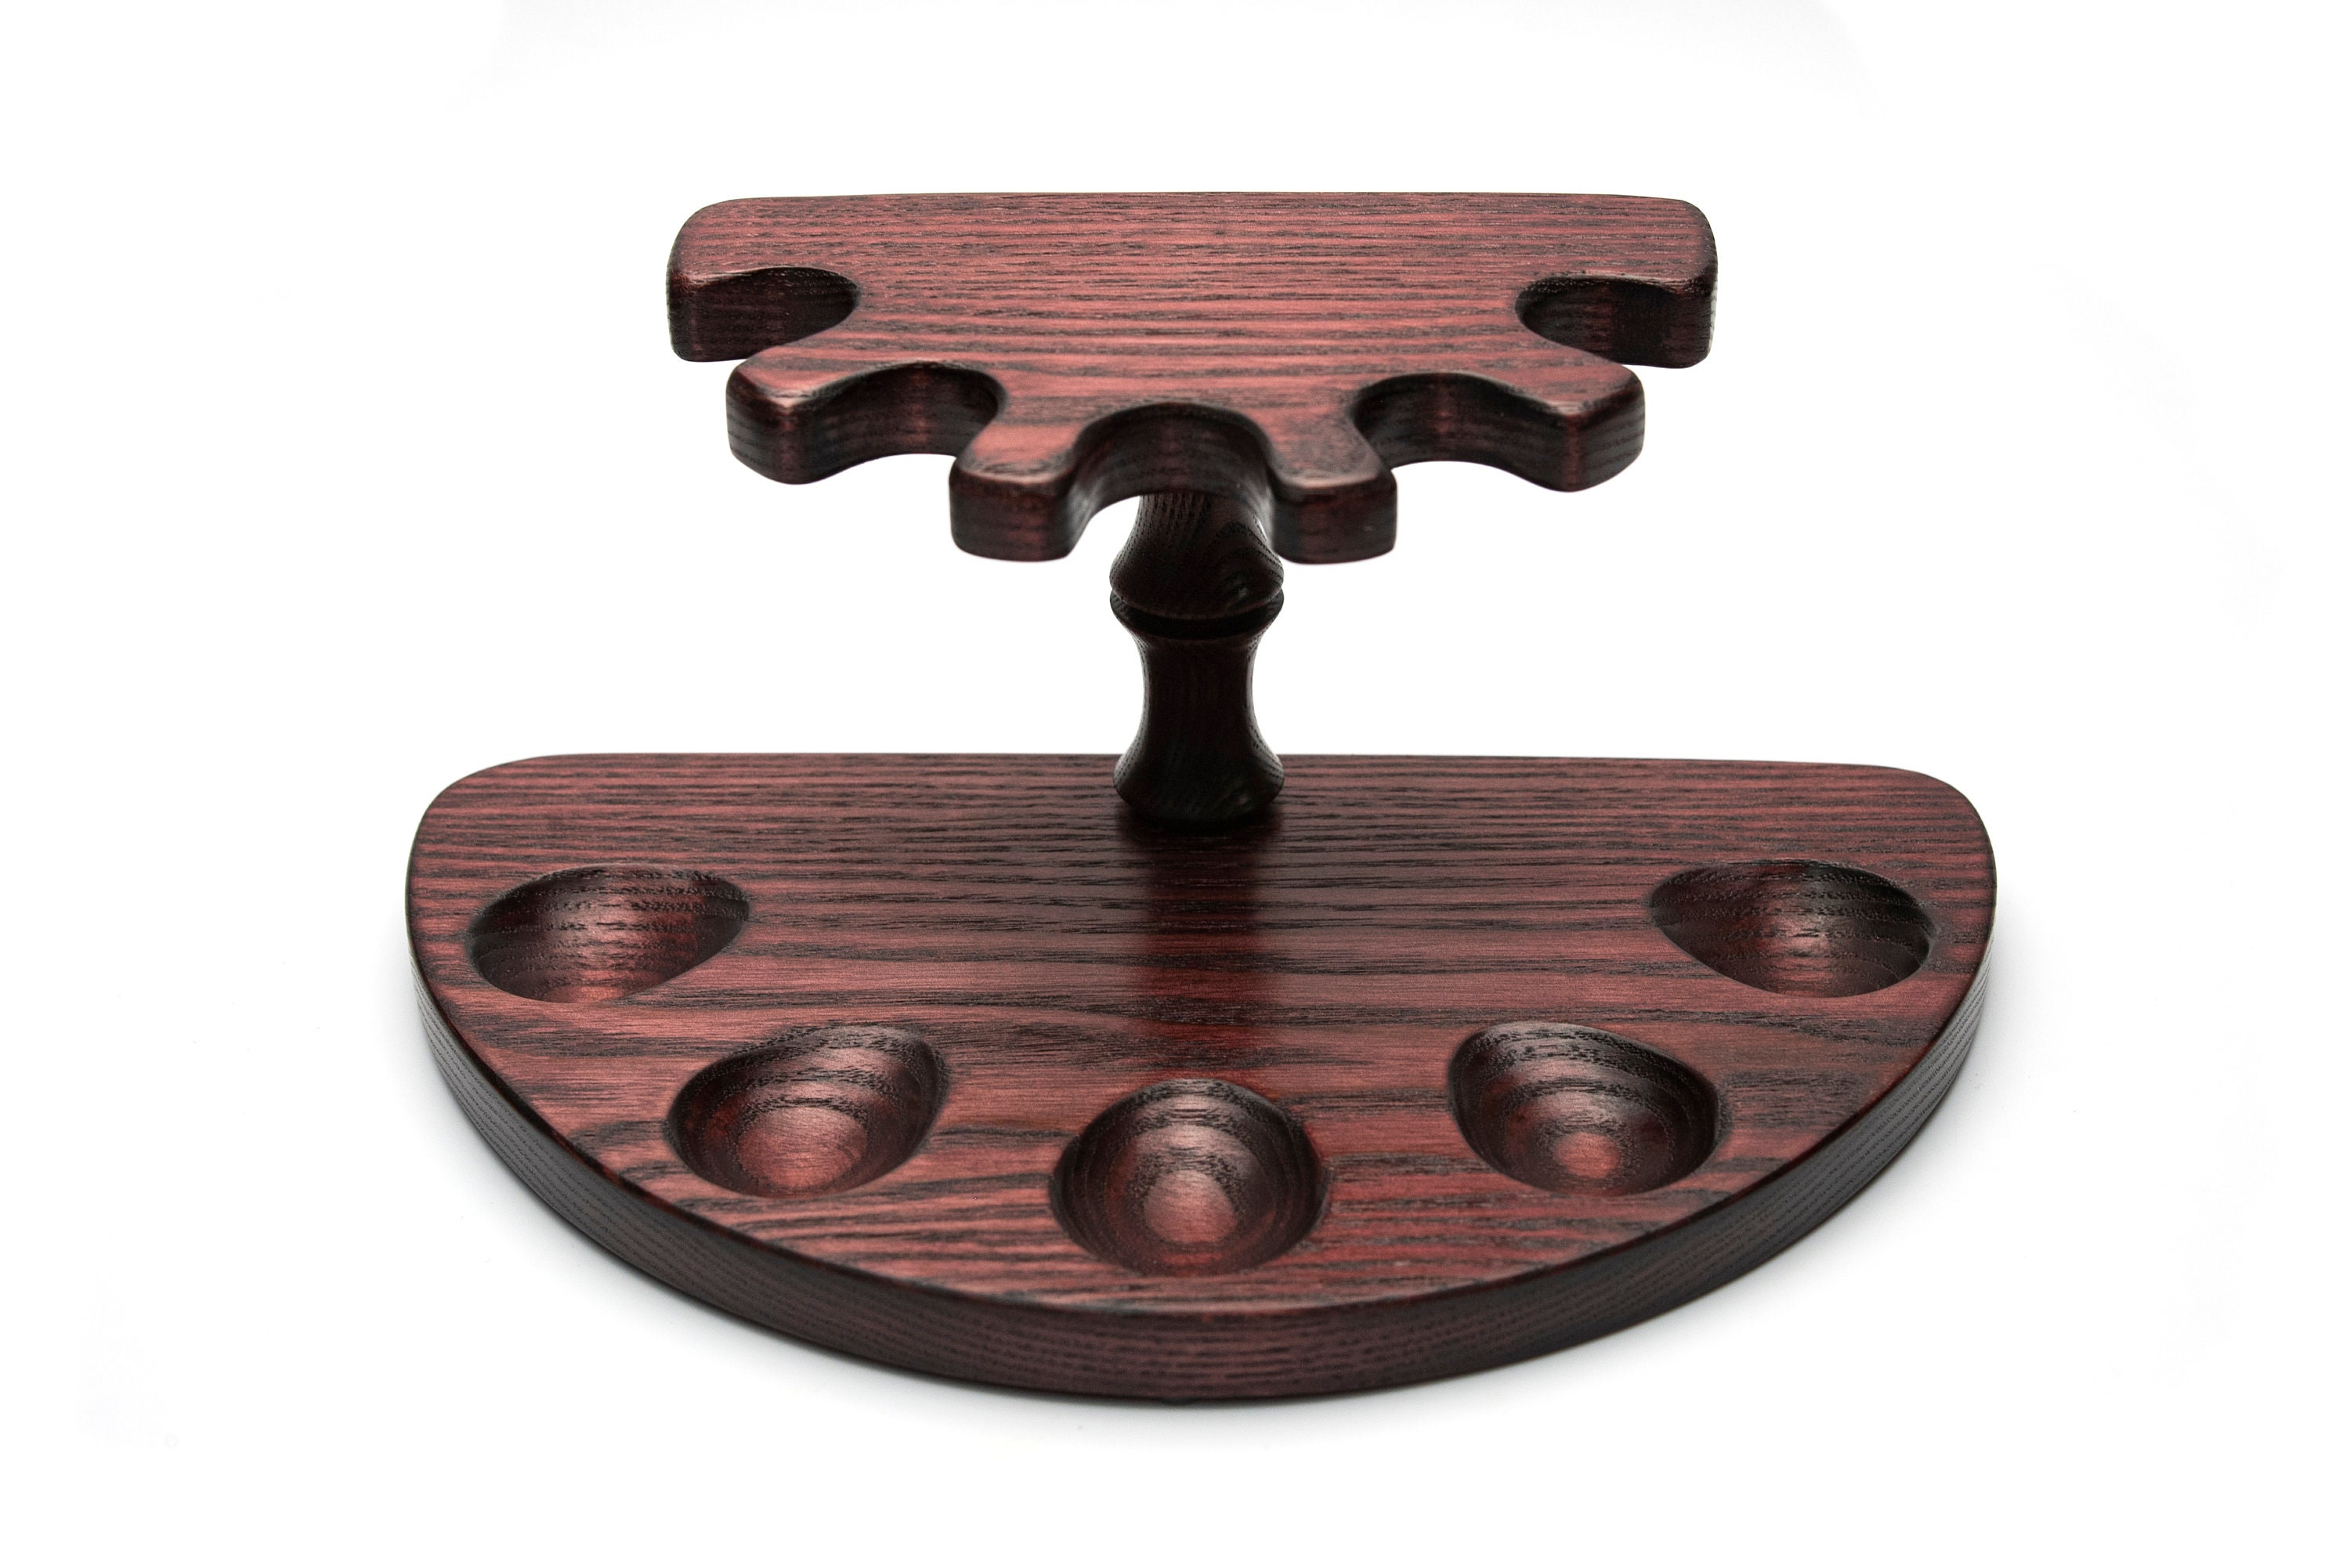 Tobacco Pipe Rack for 5 Smoking Pipes Pipe Stand Holder Made of Solid  Ash-tree Wood 5 Slots Designed With Rubber Rings Pipe Rest Kafpipe 